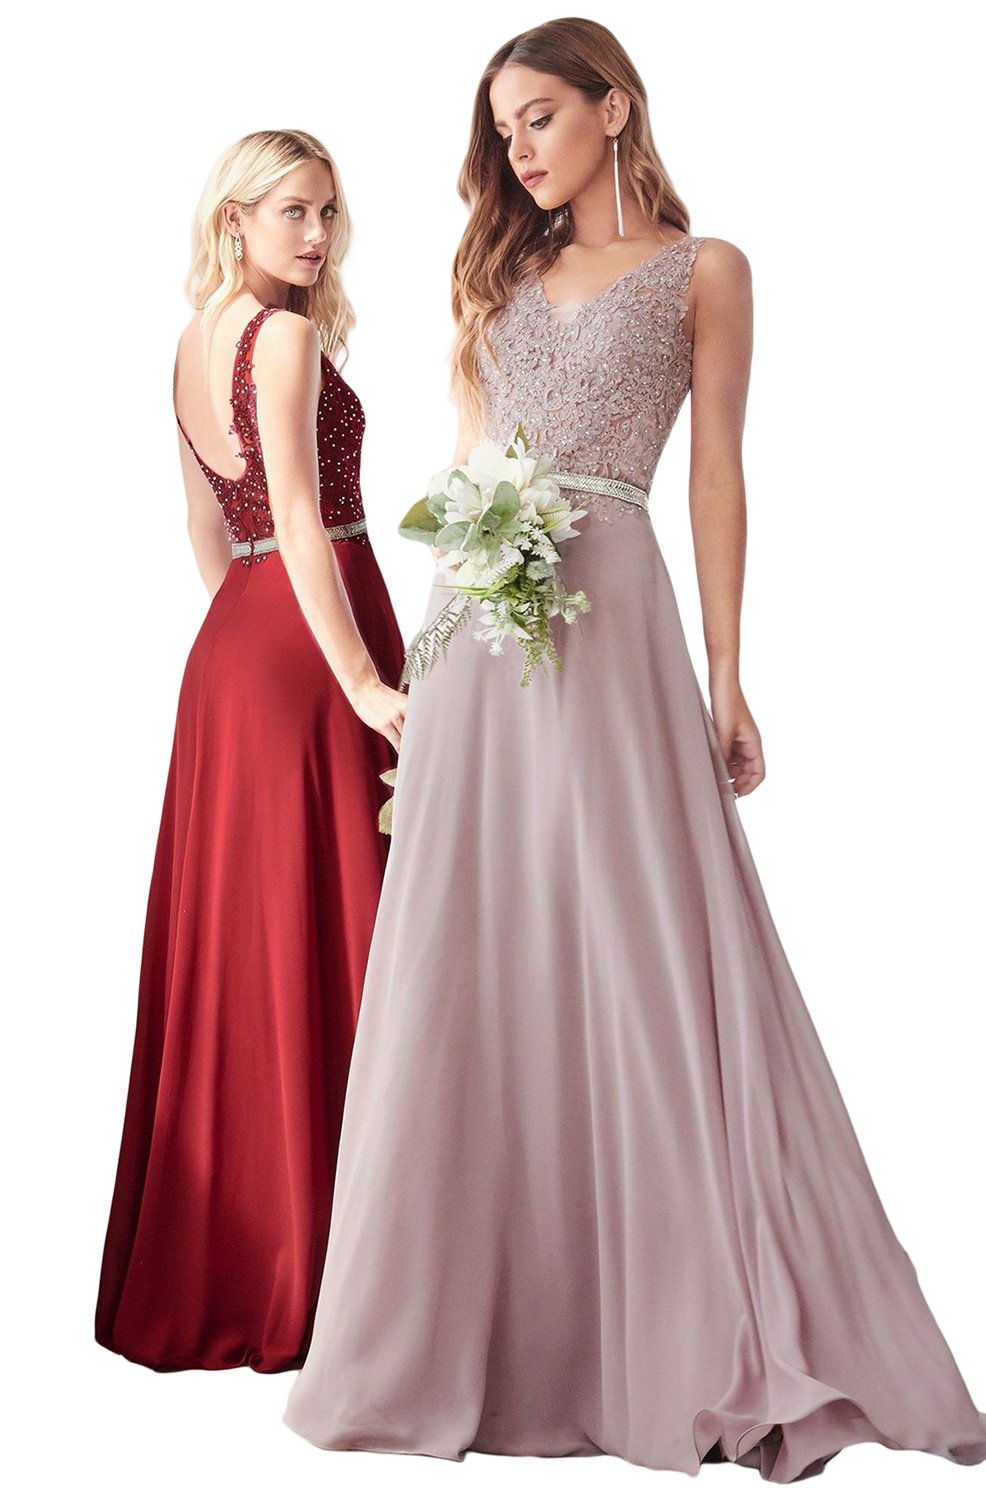 Cinderella Divine - 9173 Long Ornate Lace Bodice Chiffon Dress In Red and Pink